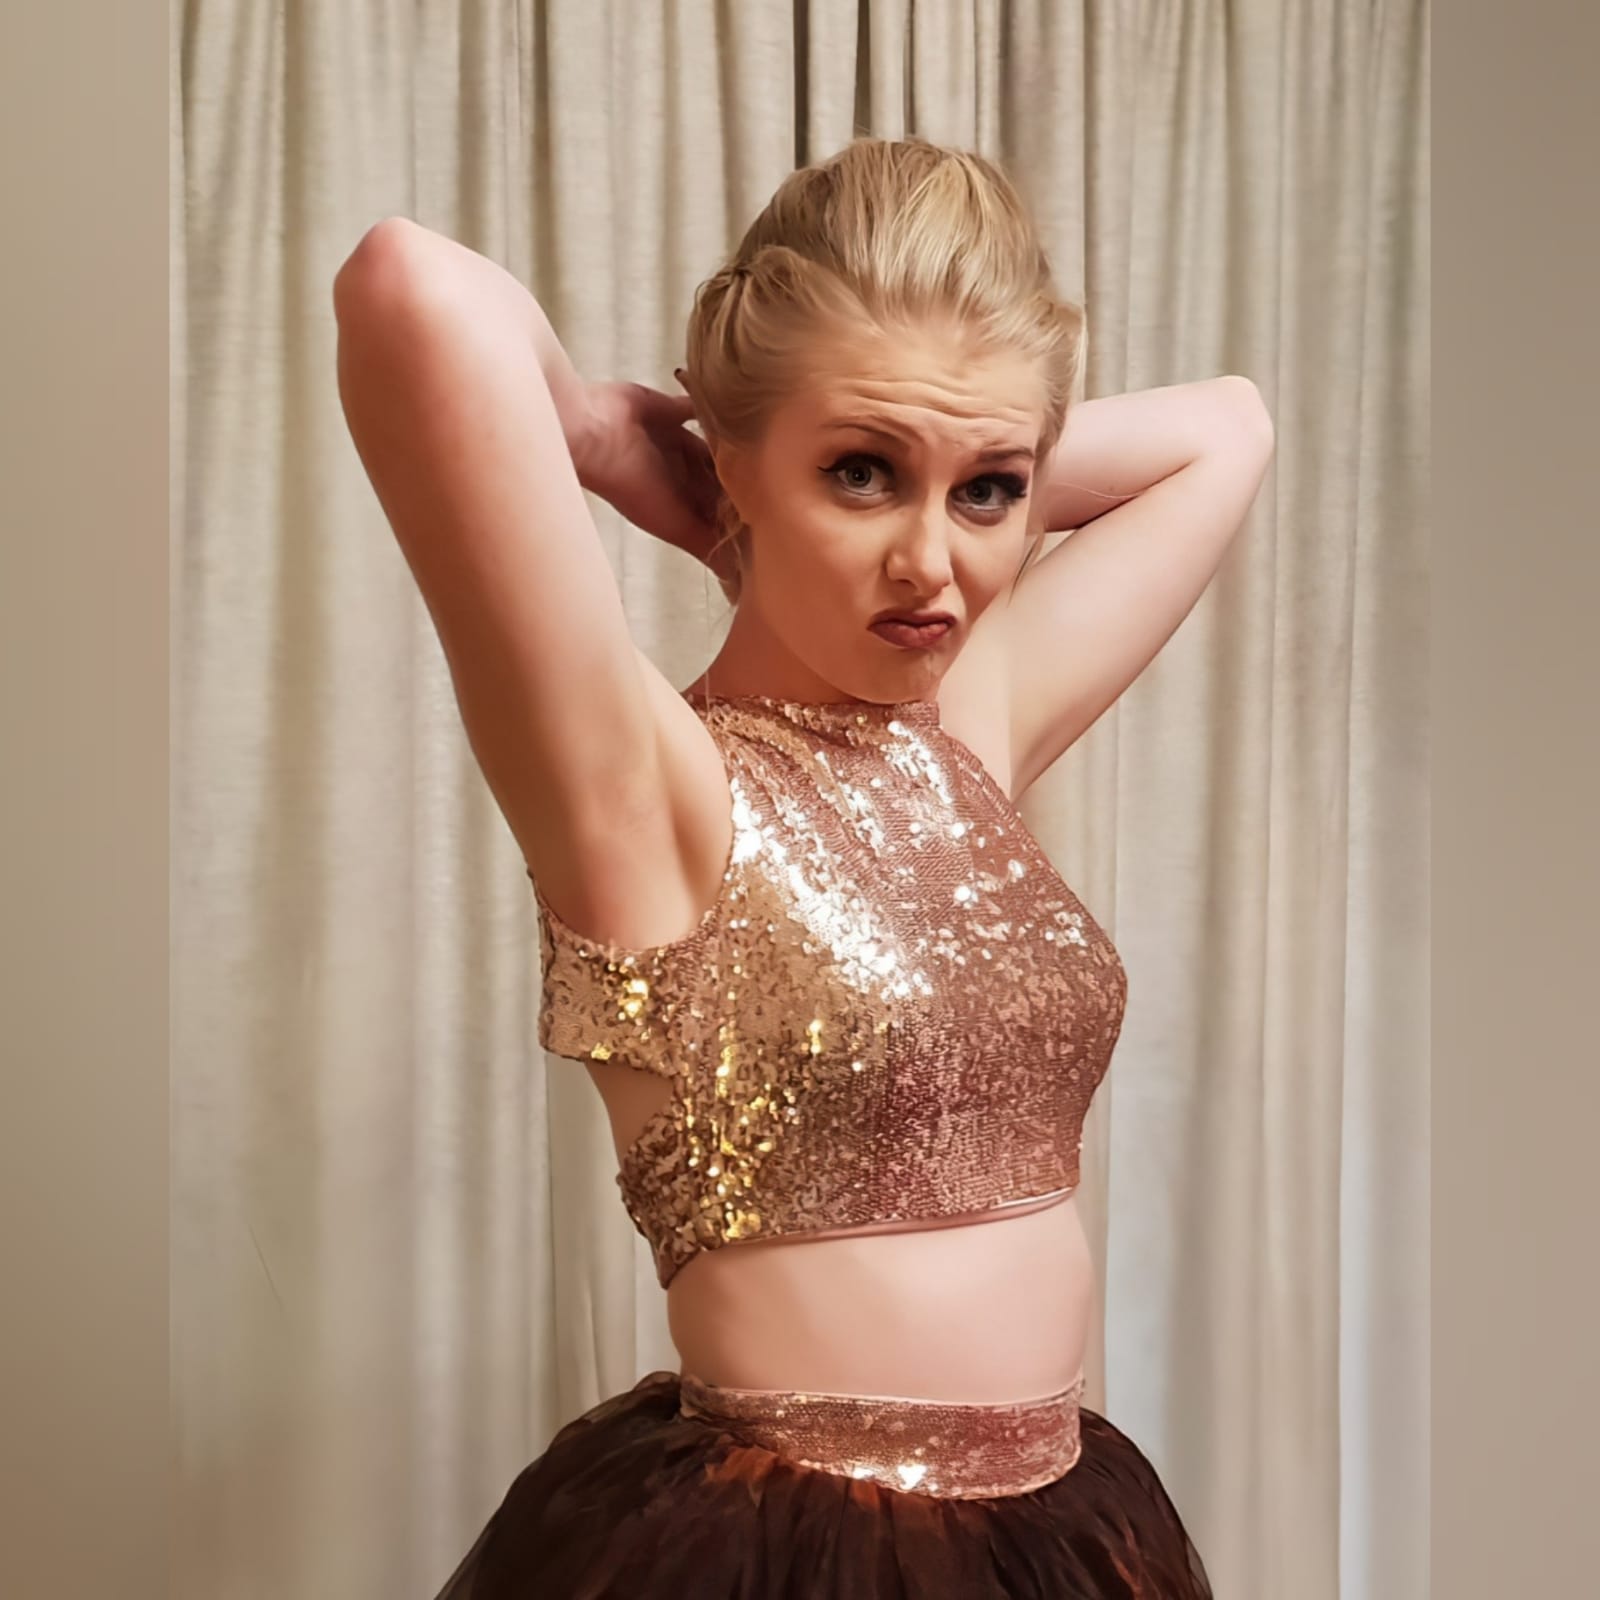 2 piece brown and rose gold prom dress 7 this awesome versatile evening dress was created for a prom dance. 2 piece brown and rose gold prom dress. With a layered organza full skirt and sequins waistband. Crop top in rosegold sequins which can be reused in several other occasions.